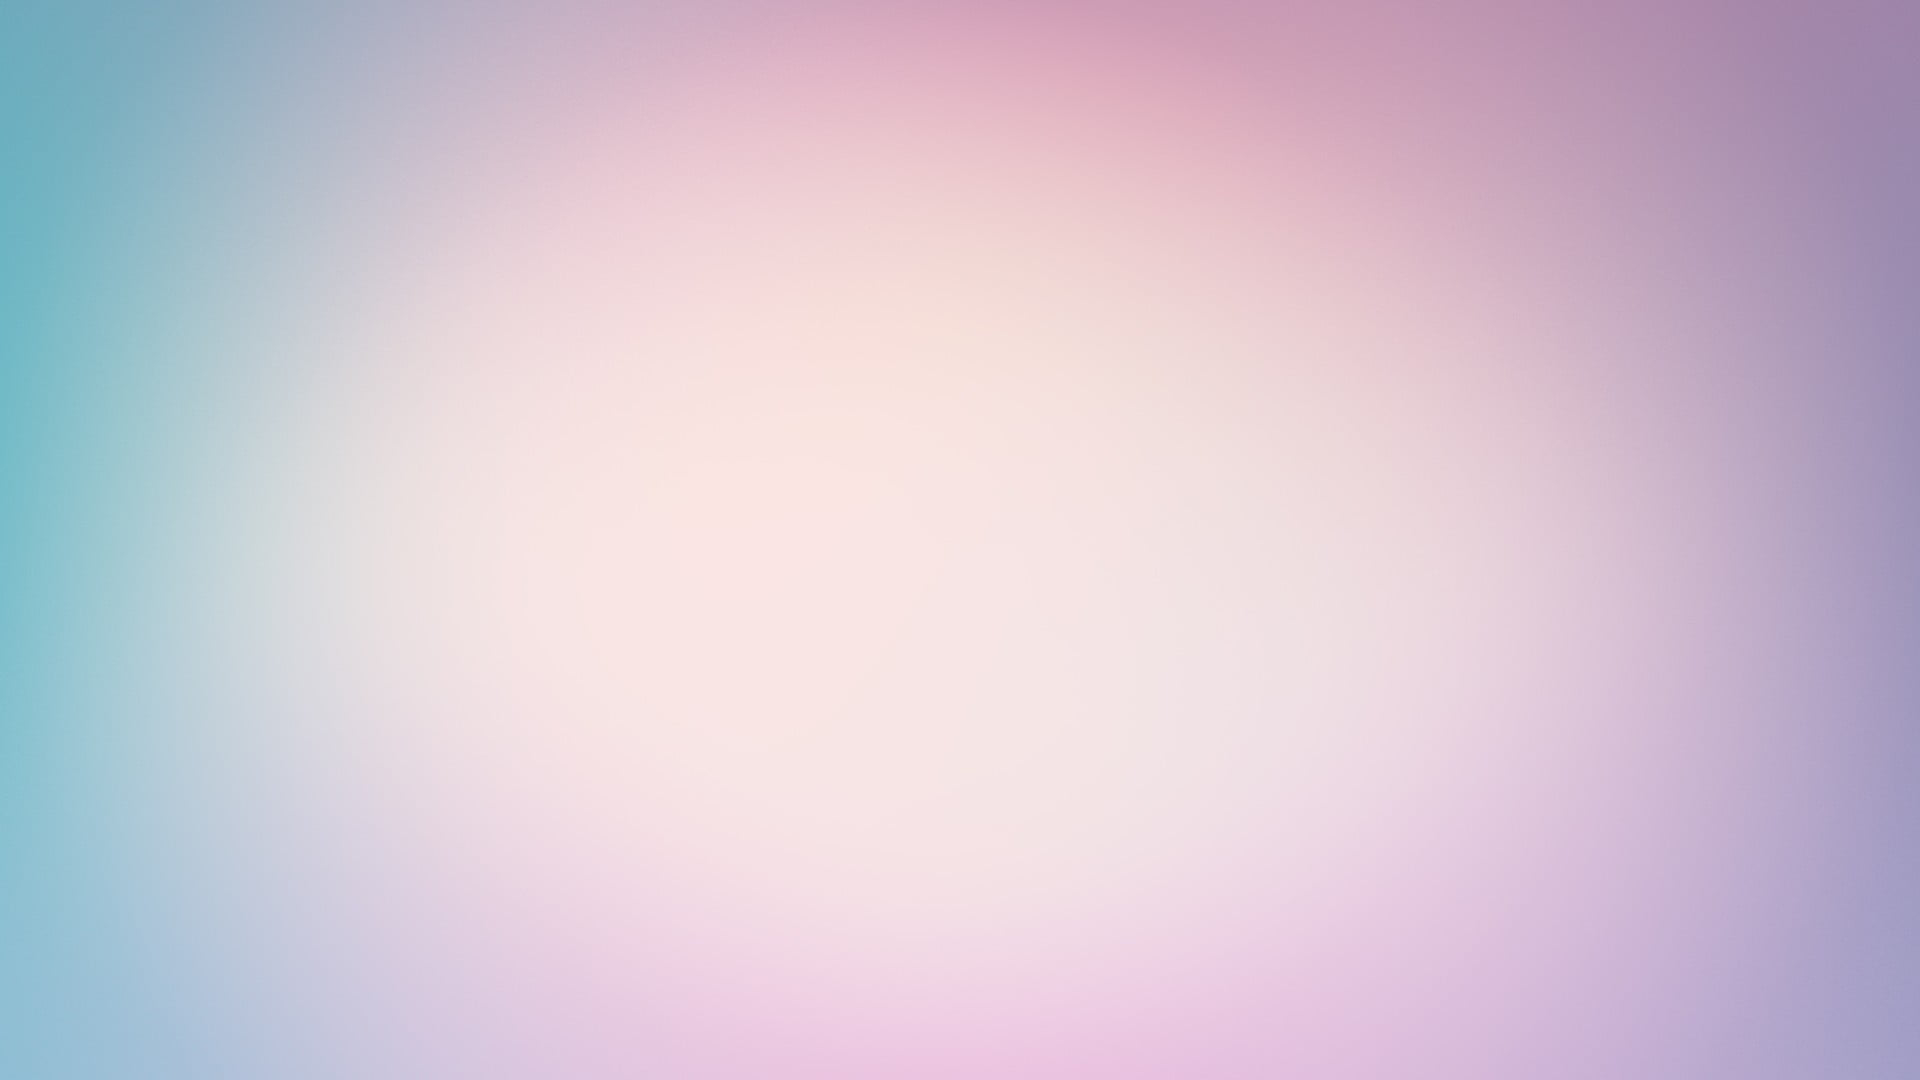 Abstract wallpaper, backgrounds, pastel colored, no people, full frame